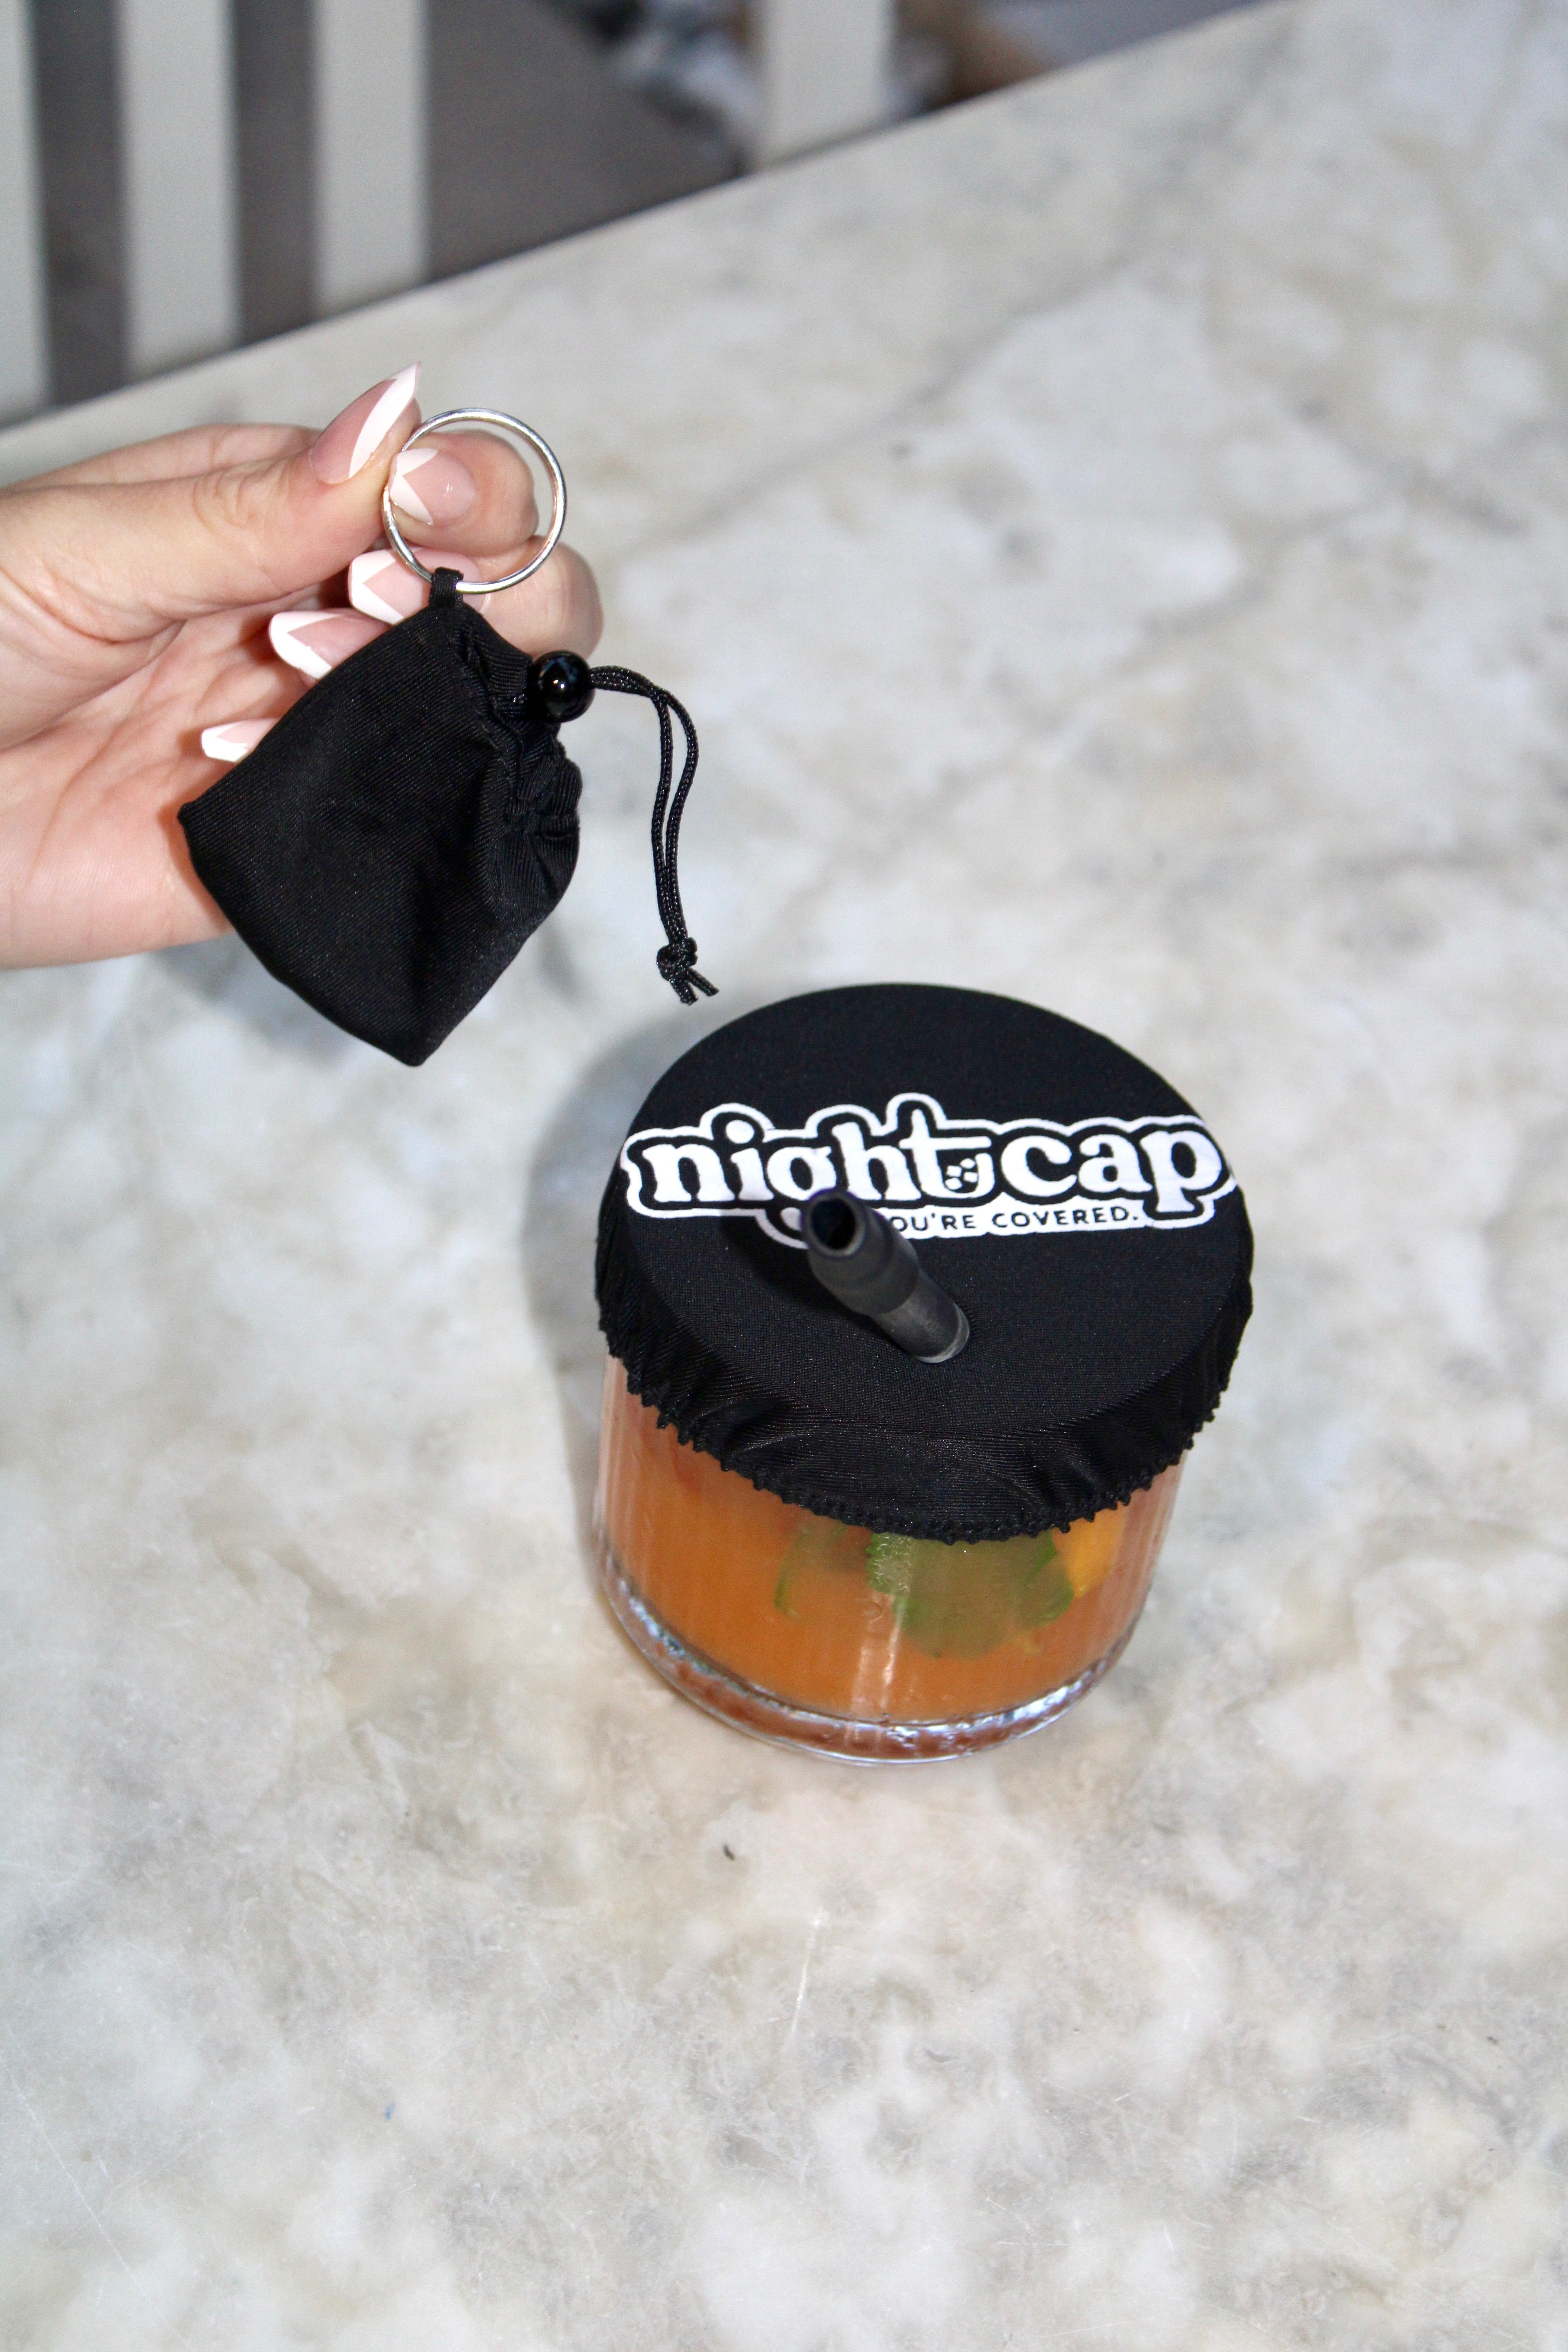 NightCap Drink Cover Keychain- Inside each Keychain Pouch is a Nightcap  Drink Cover- The Original Reusable Drink Spiking Prevention Drink Cover 2  Pack